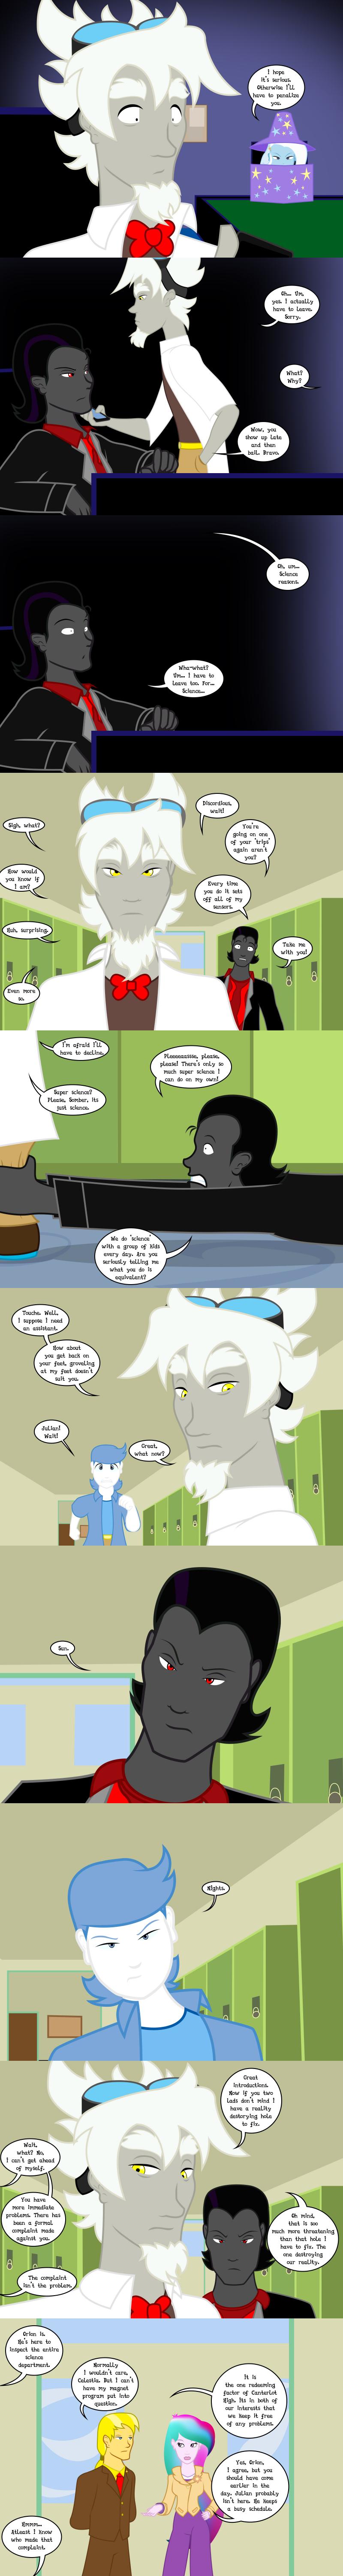 Page 24 - Part 1